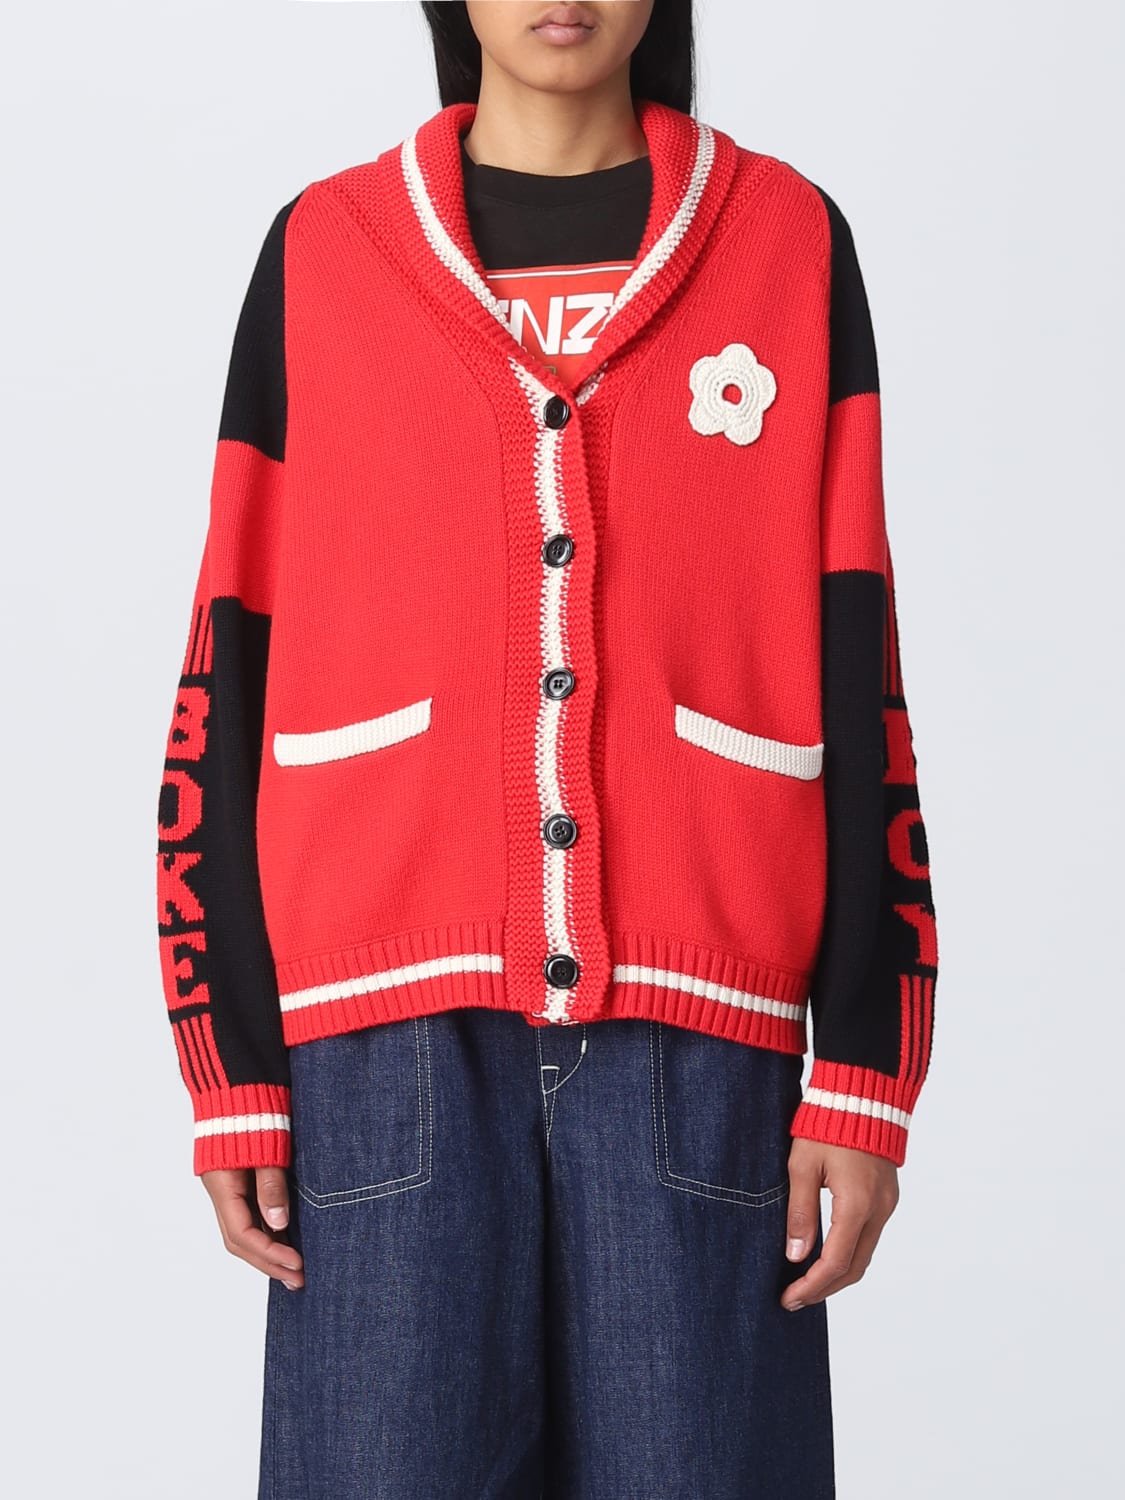 KENZO: for woman - Red | Kenzo jacket online on GIGLIO.COM